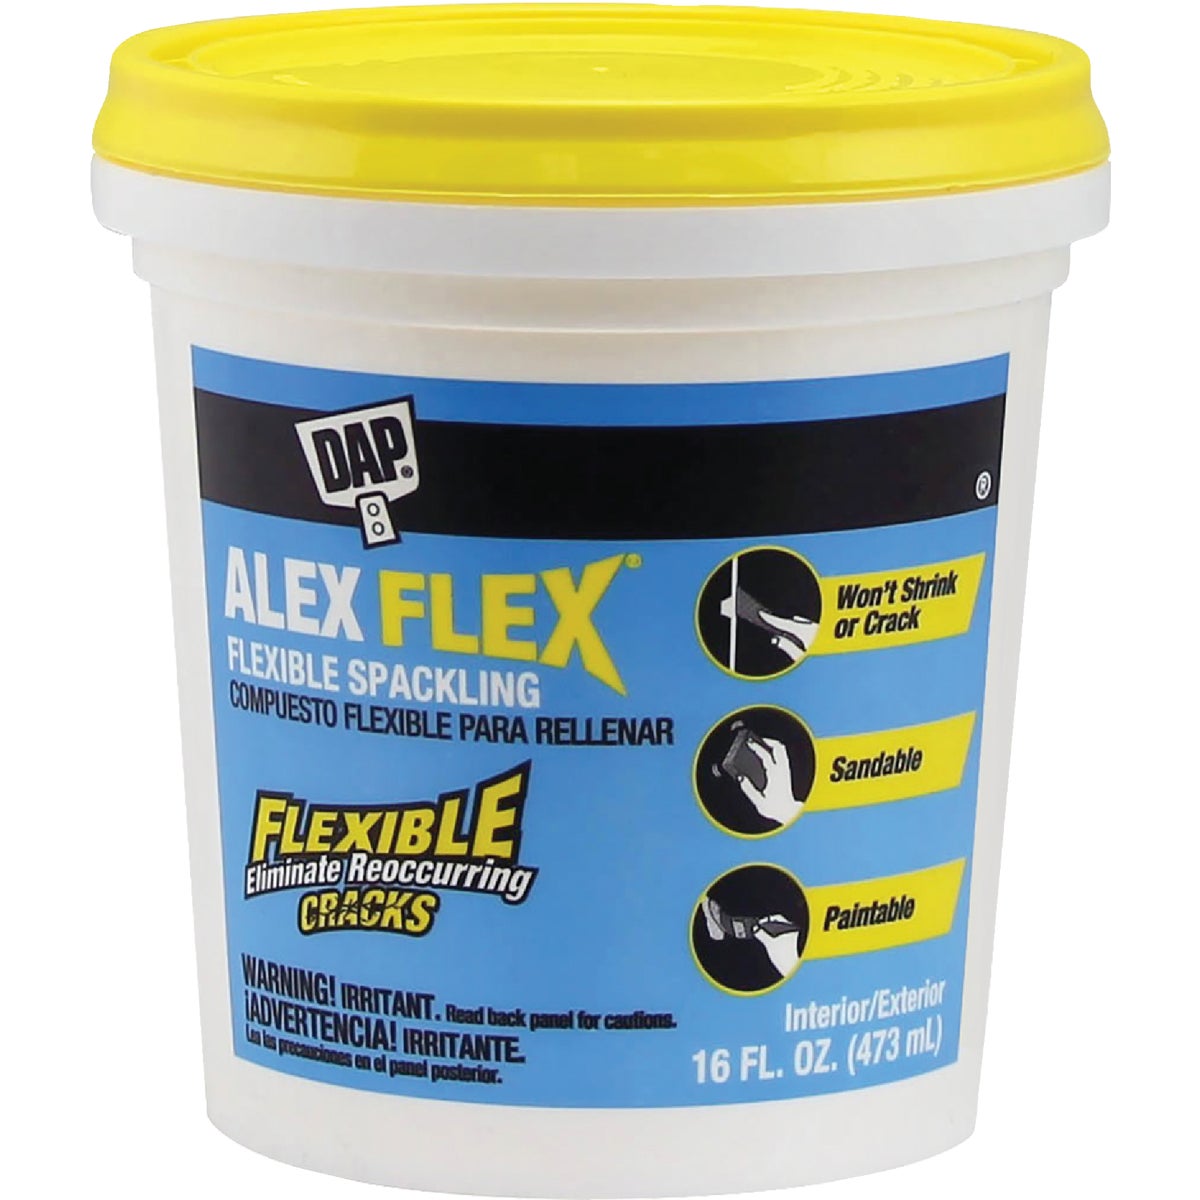 Item 772511, Flexible spackling provides a solution to eliminate reoccurring cracks in 